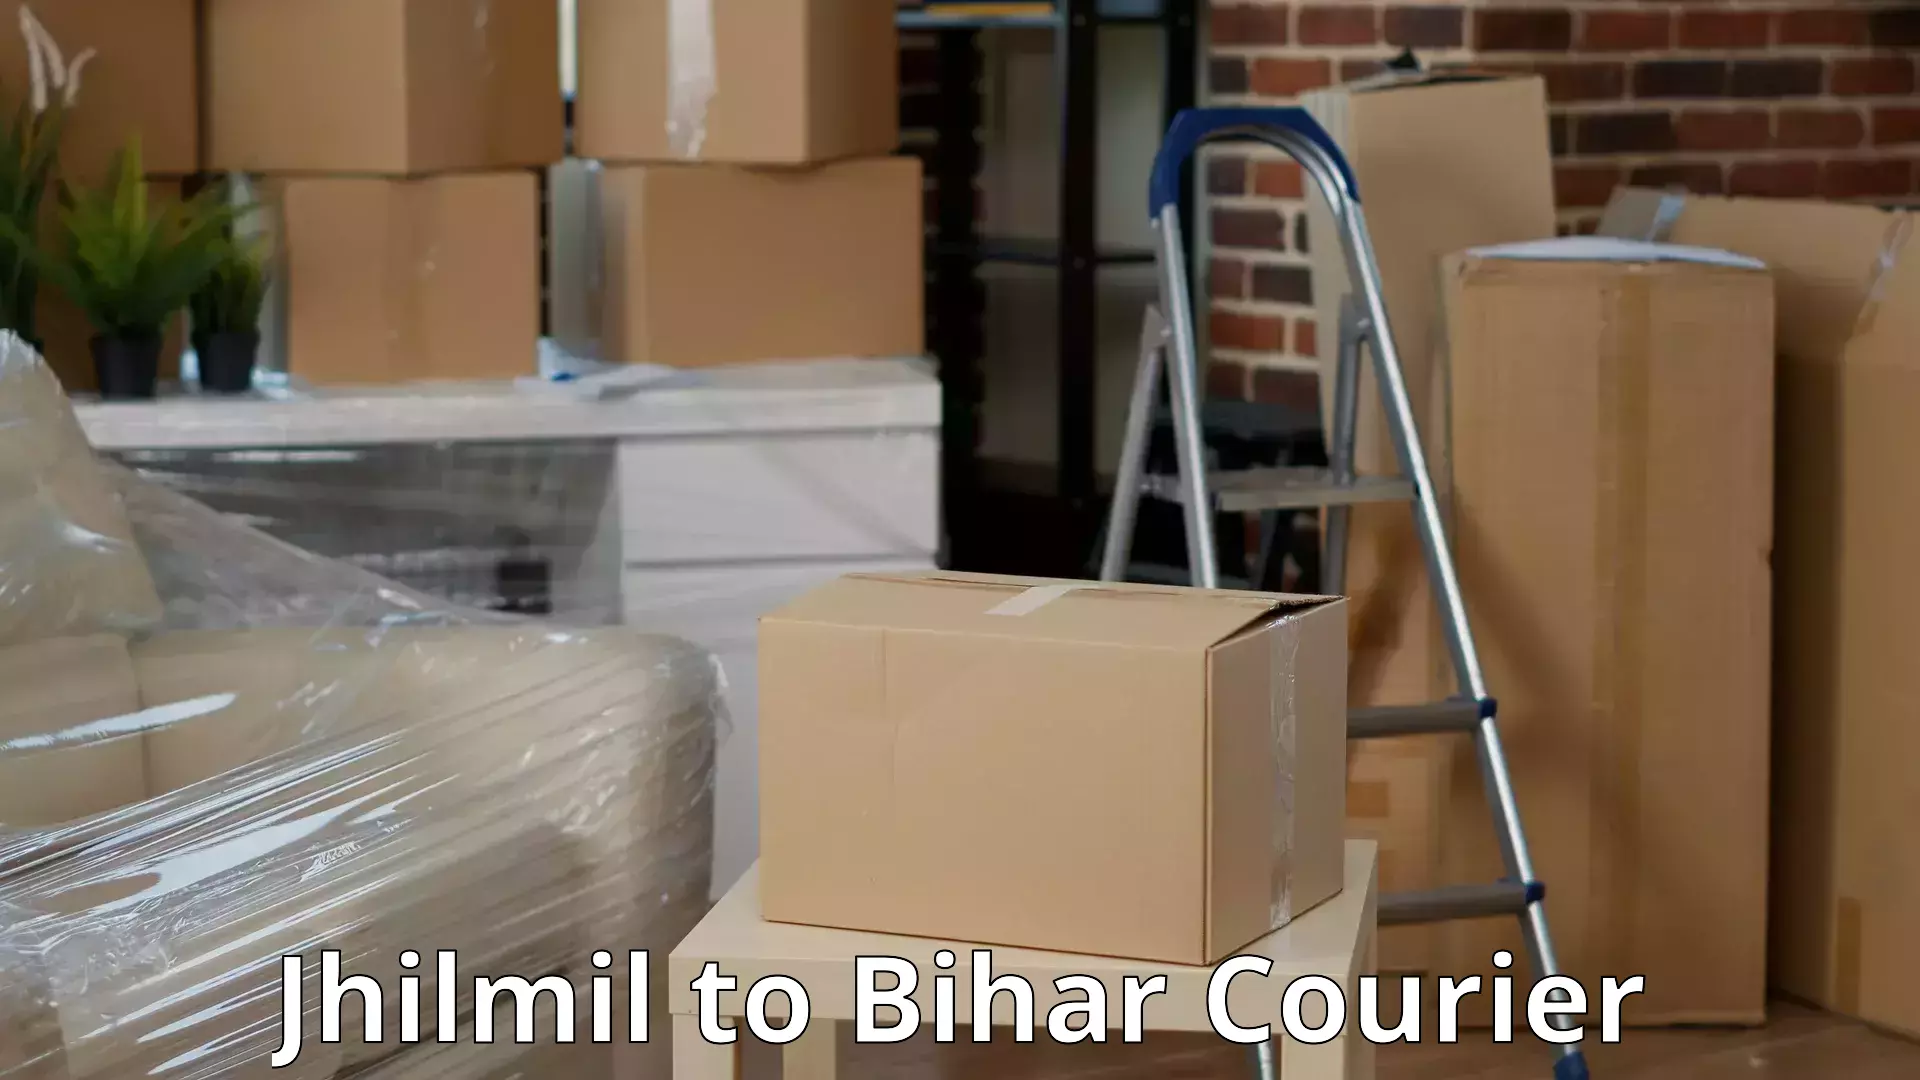 Residential relocation services in Jhilmil to Tekari